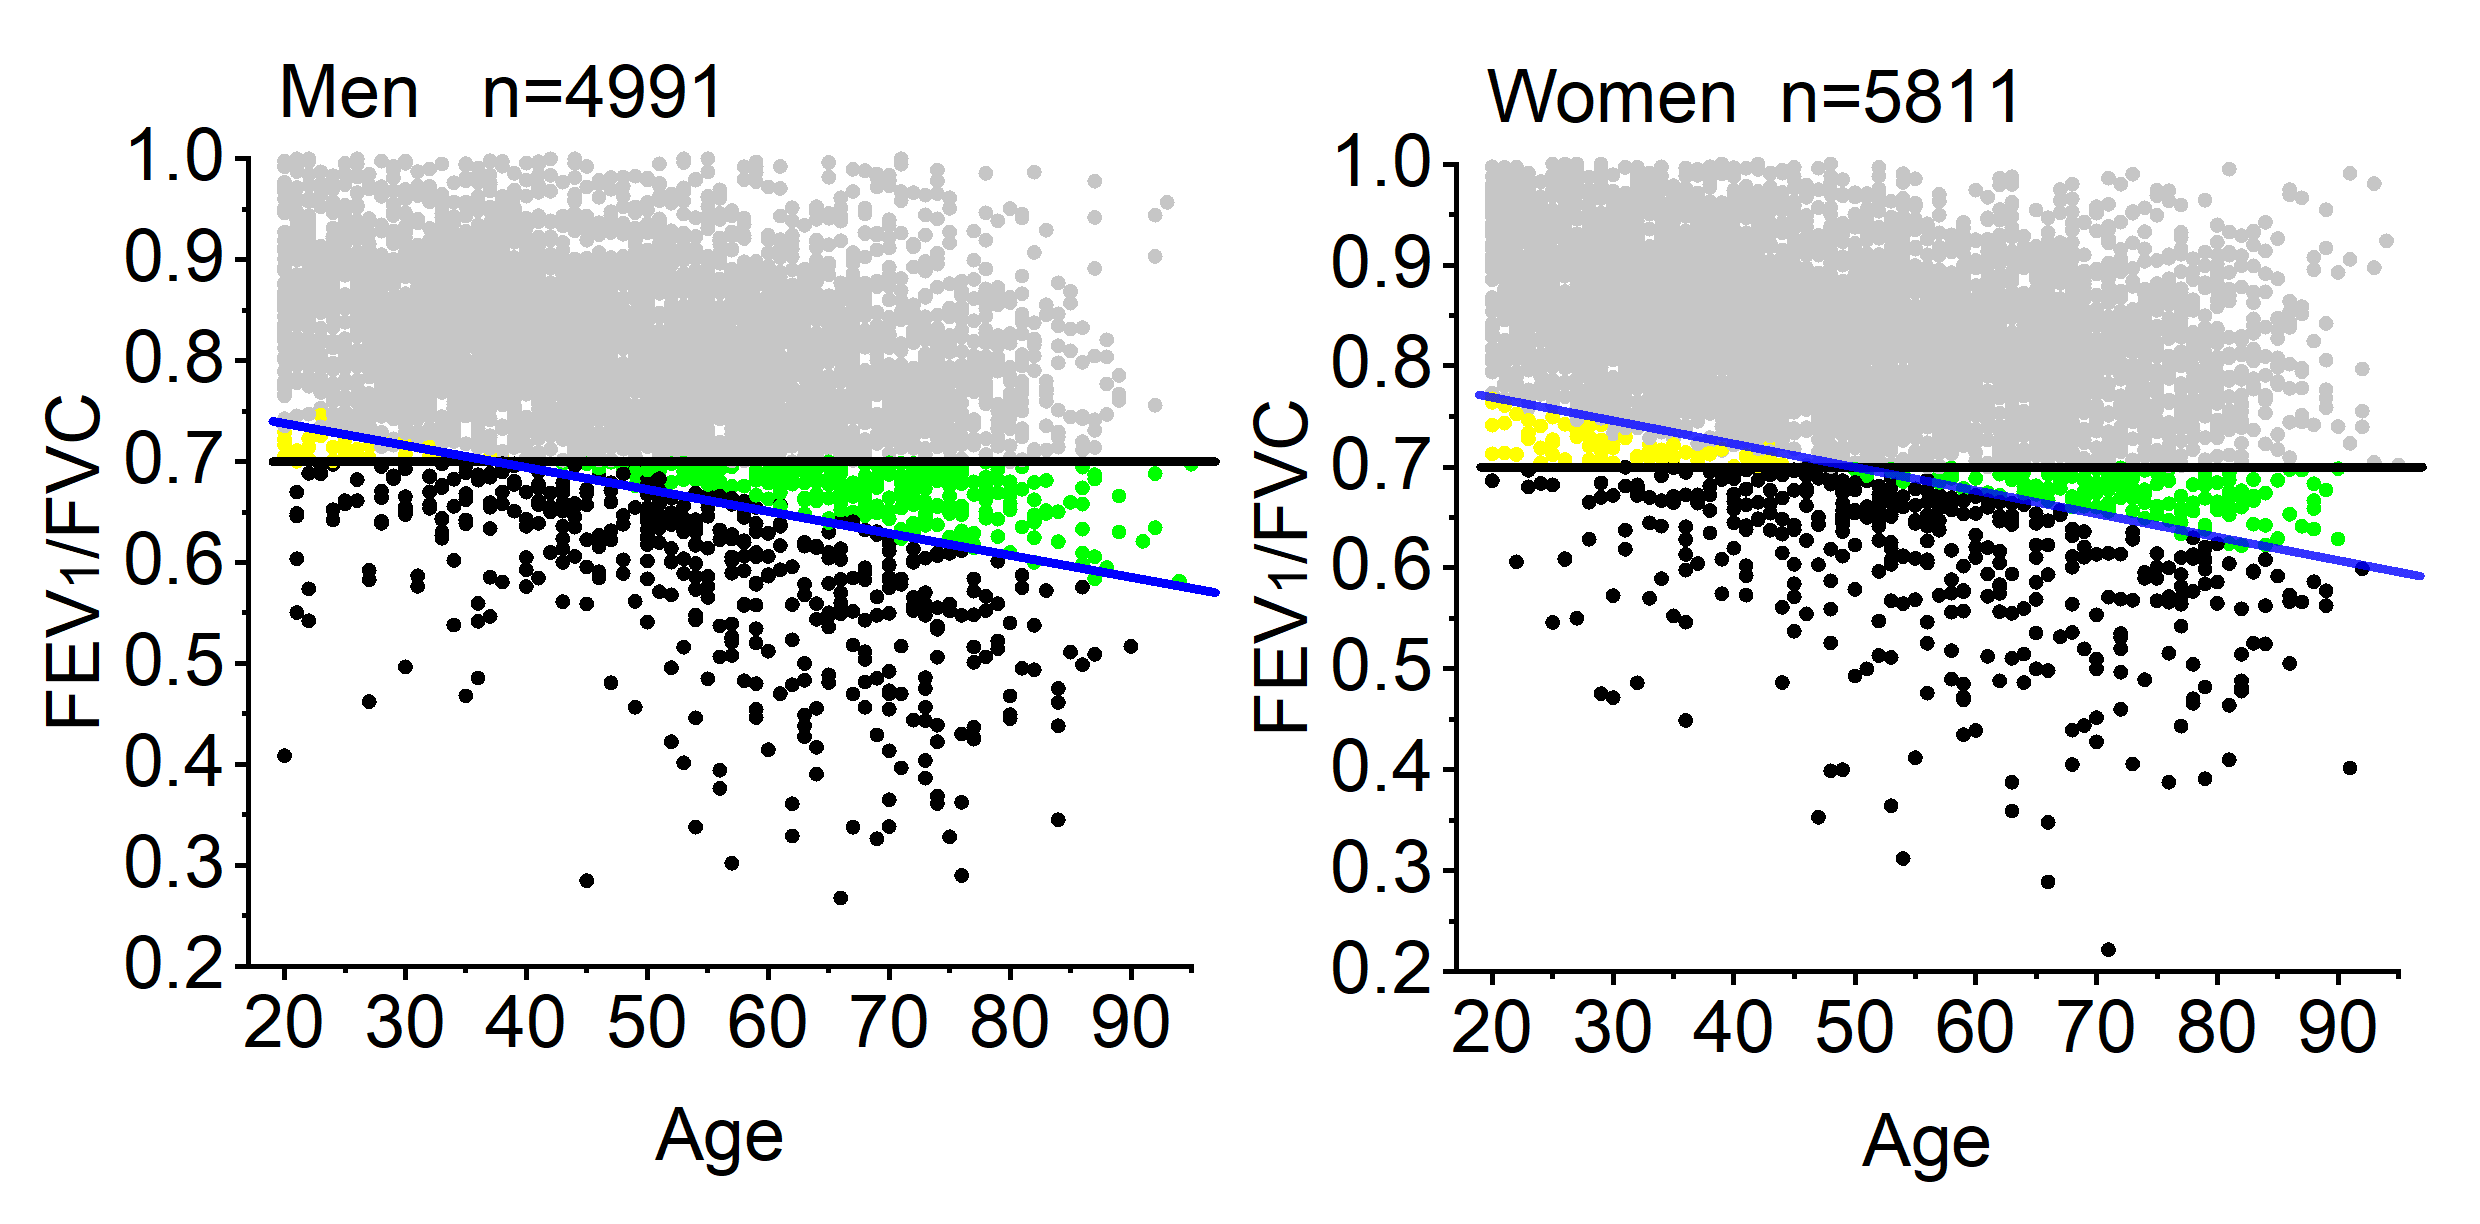 Plot of HSE 2011 FEV1/FVC for Males and Females